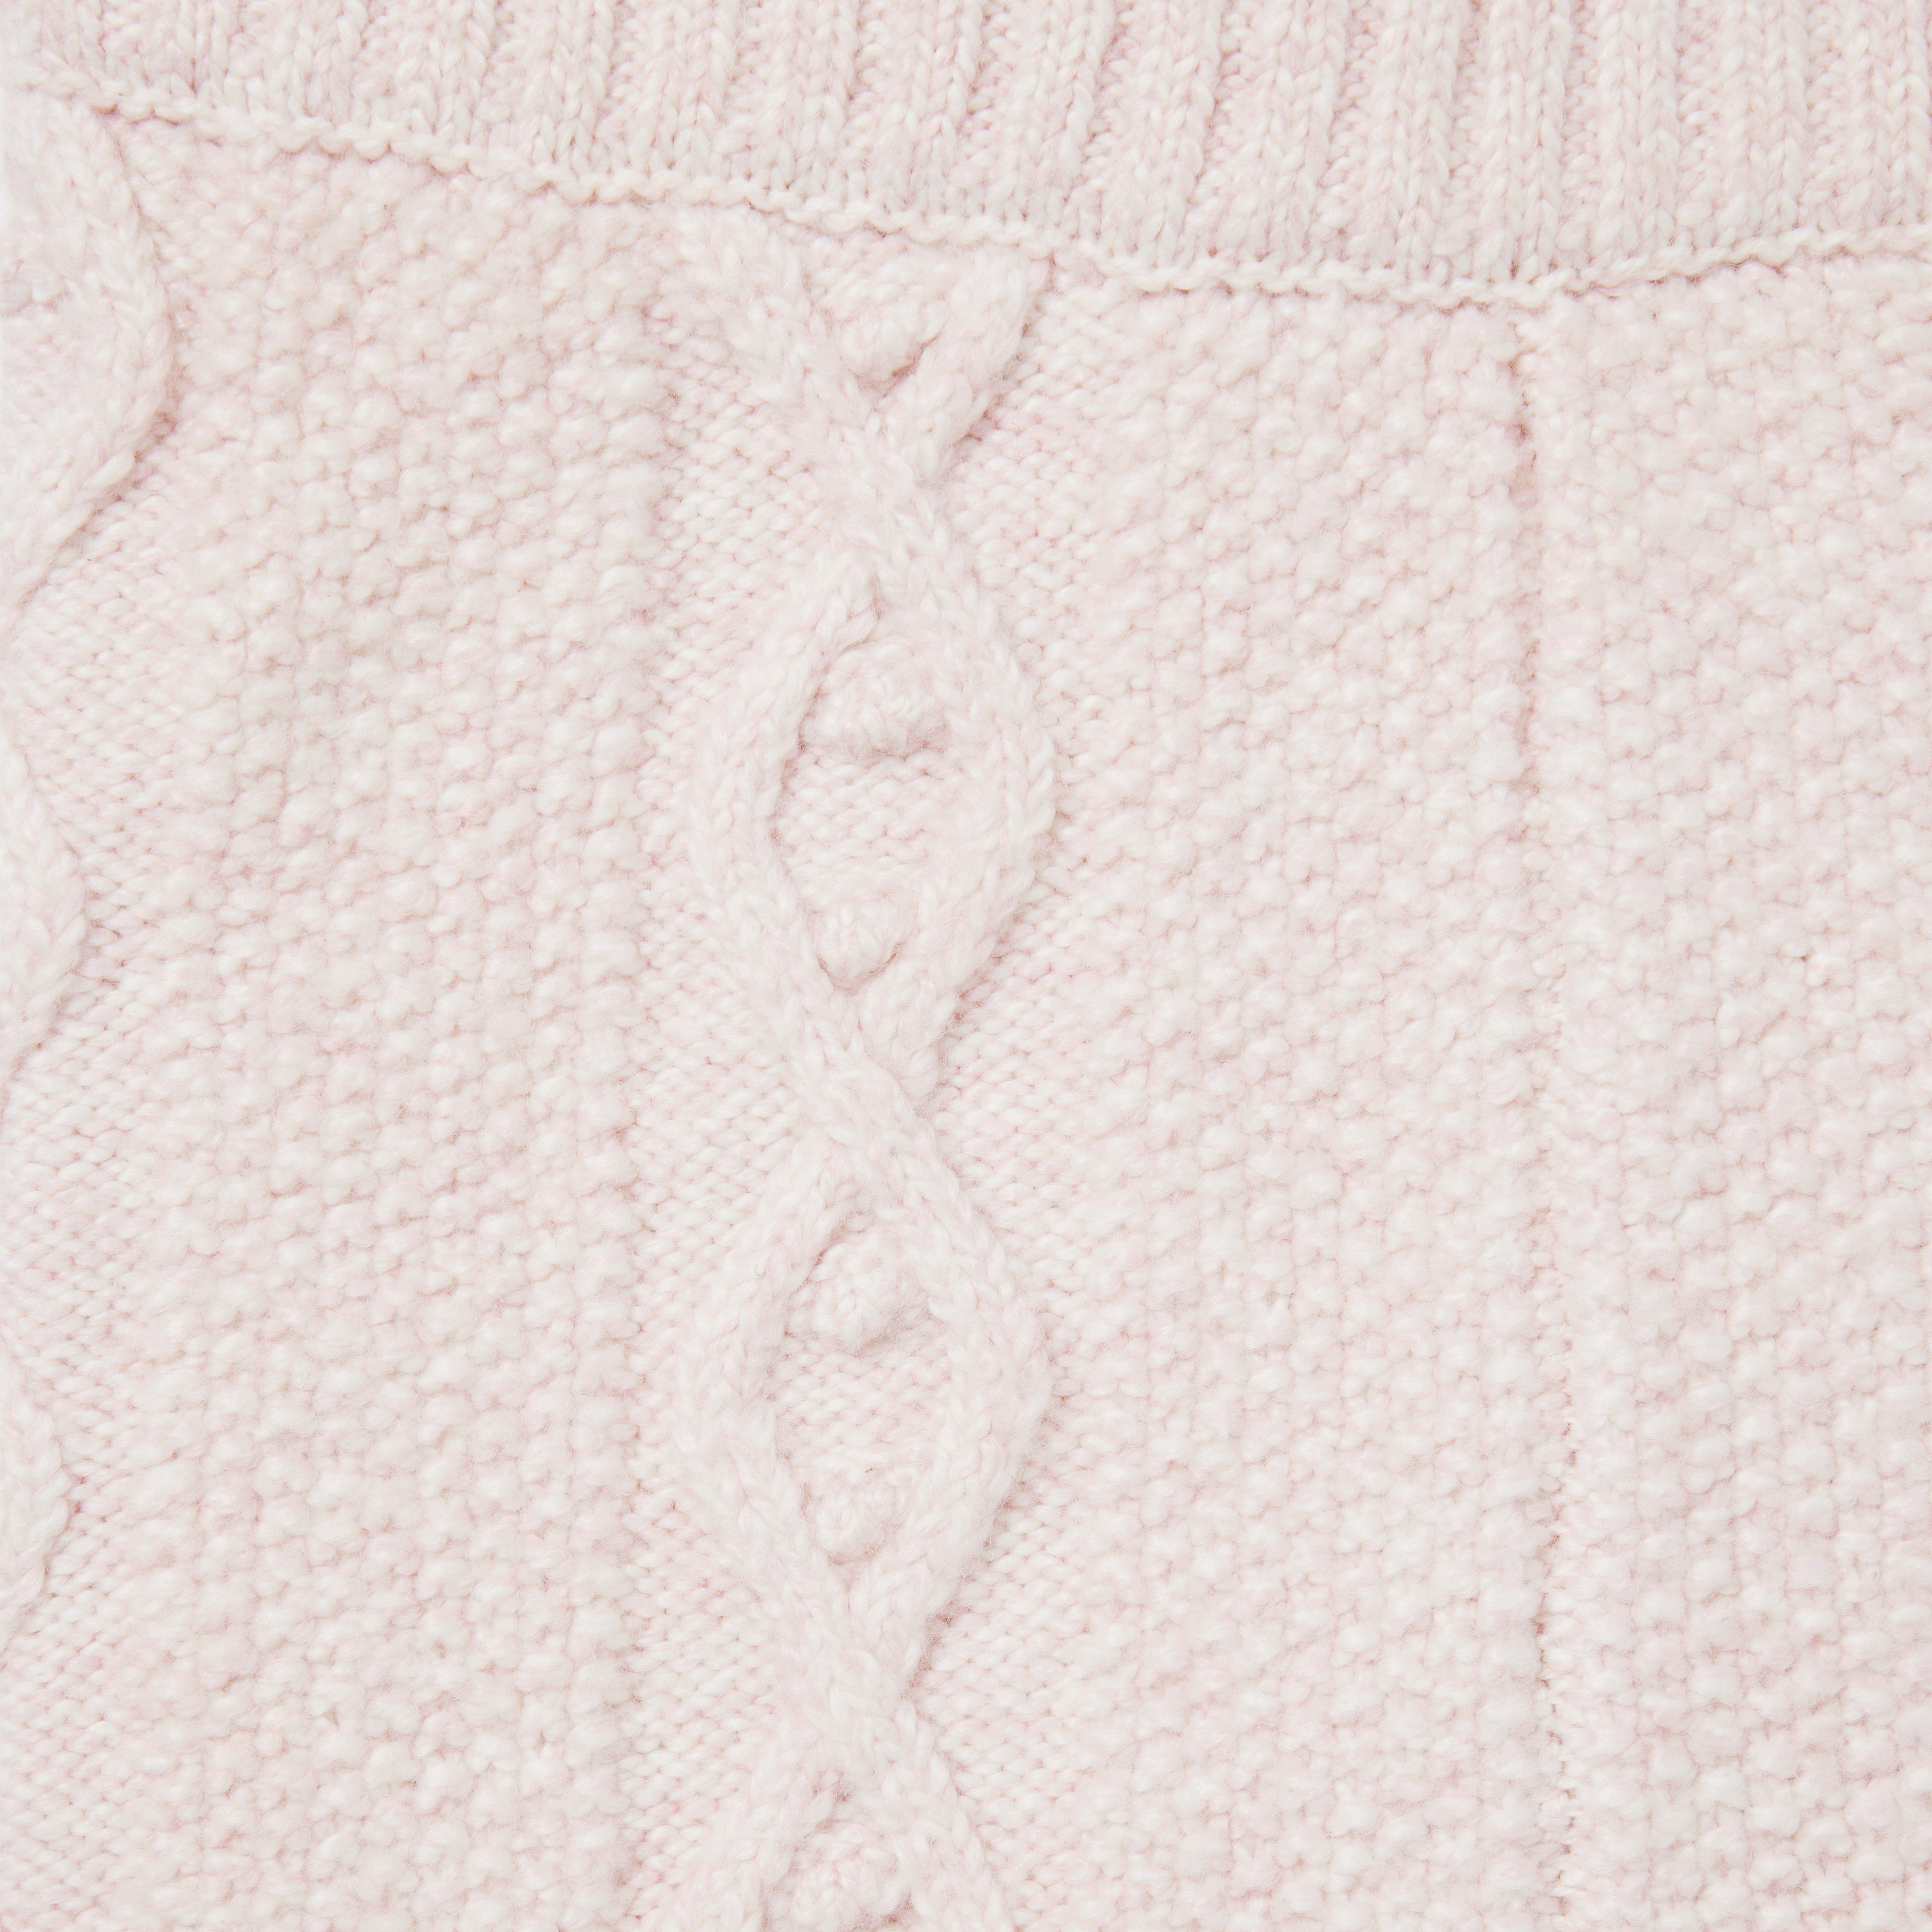 The Cozy Cable Knit Baby Pant 